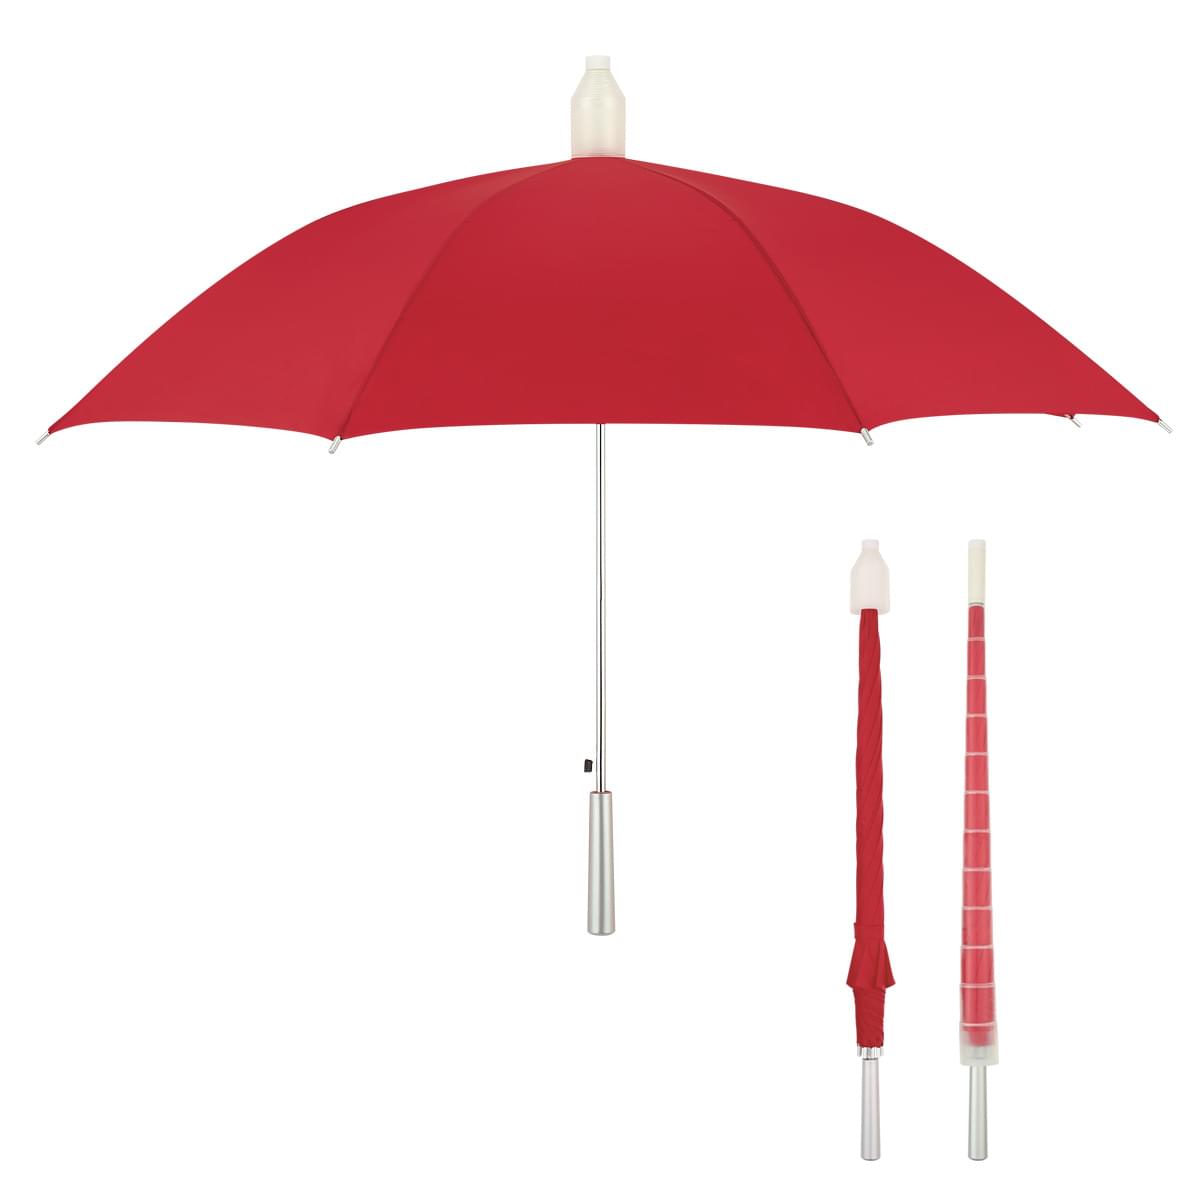 46" Umbrella With Collapsible Cover